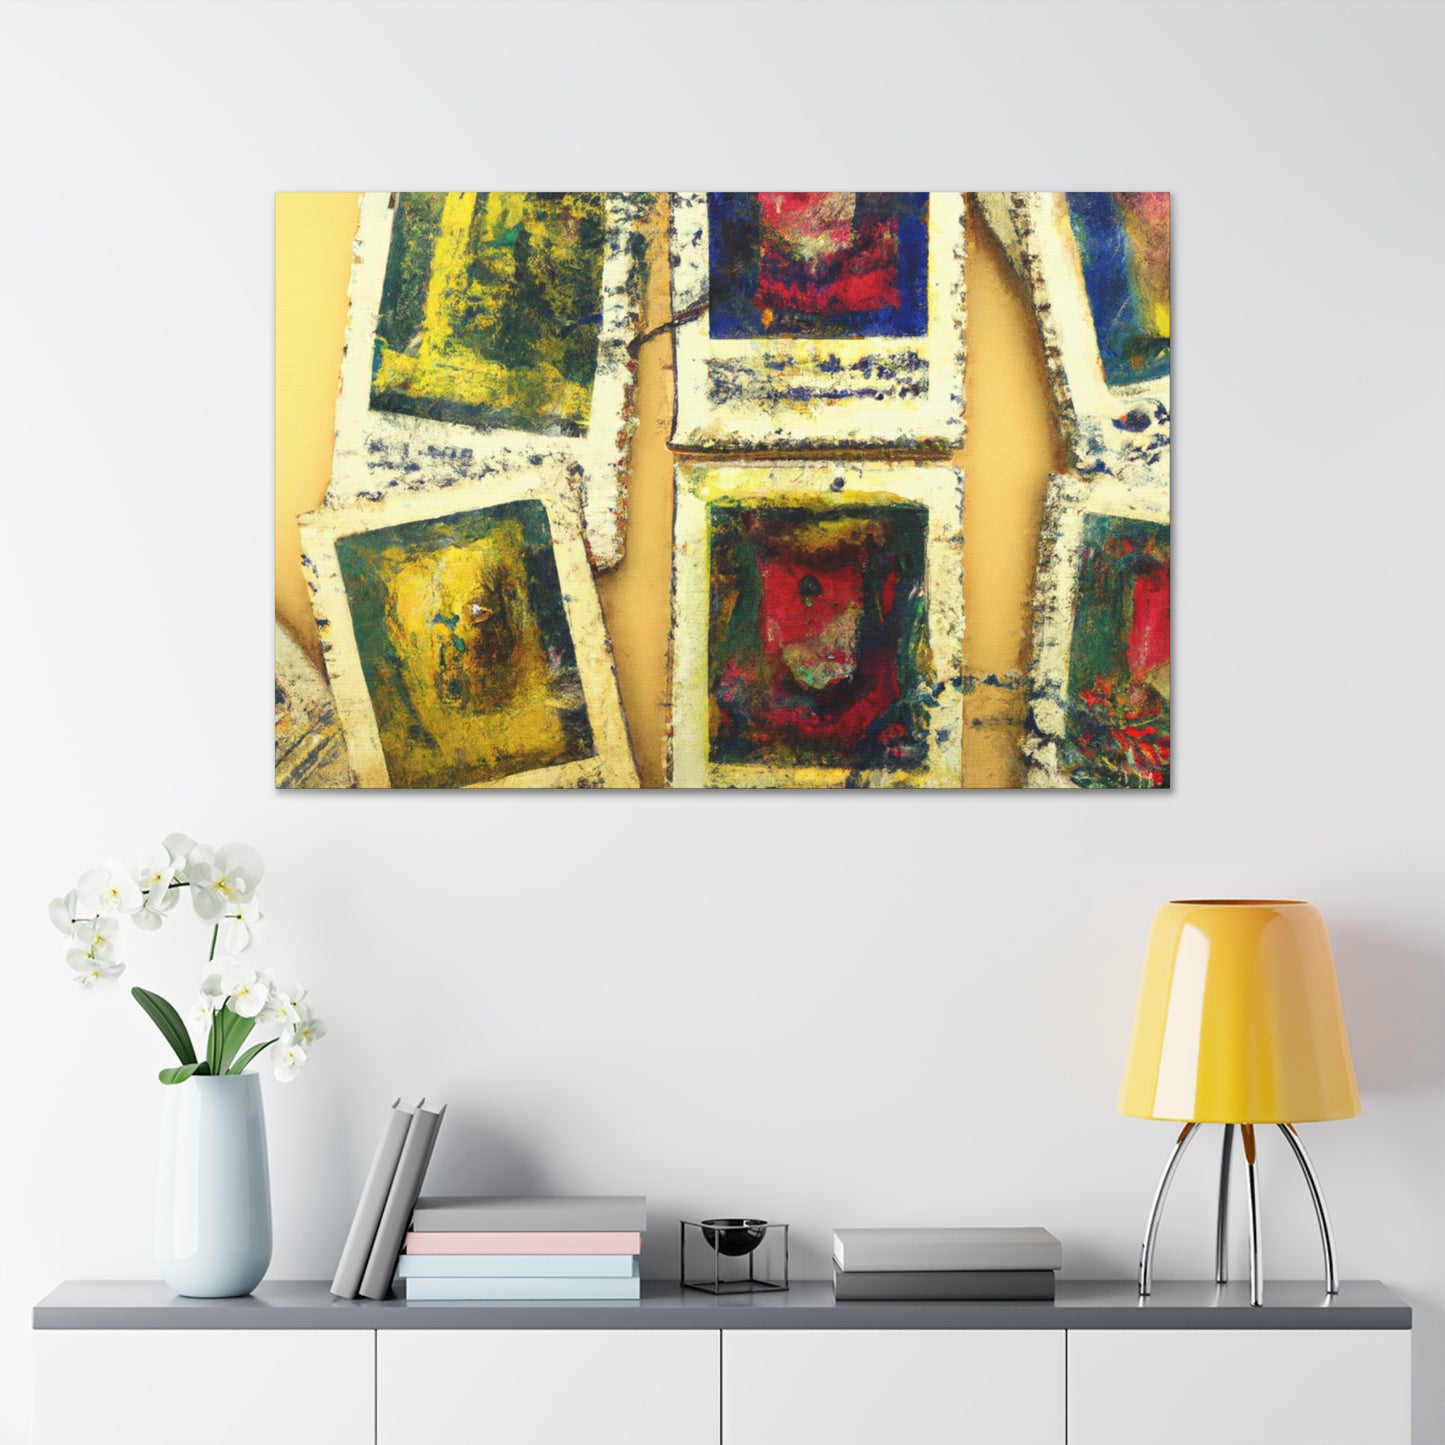 Global Wonders Postage Stamps - Postage Stamp Collector Canvas Wall Art